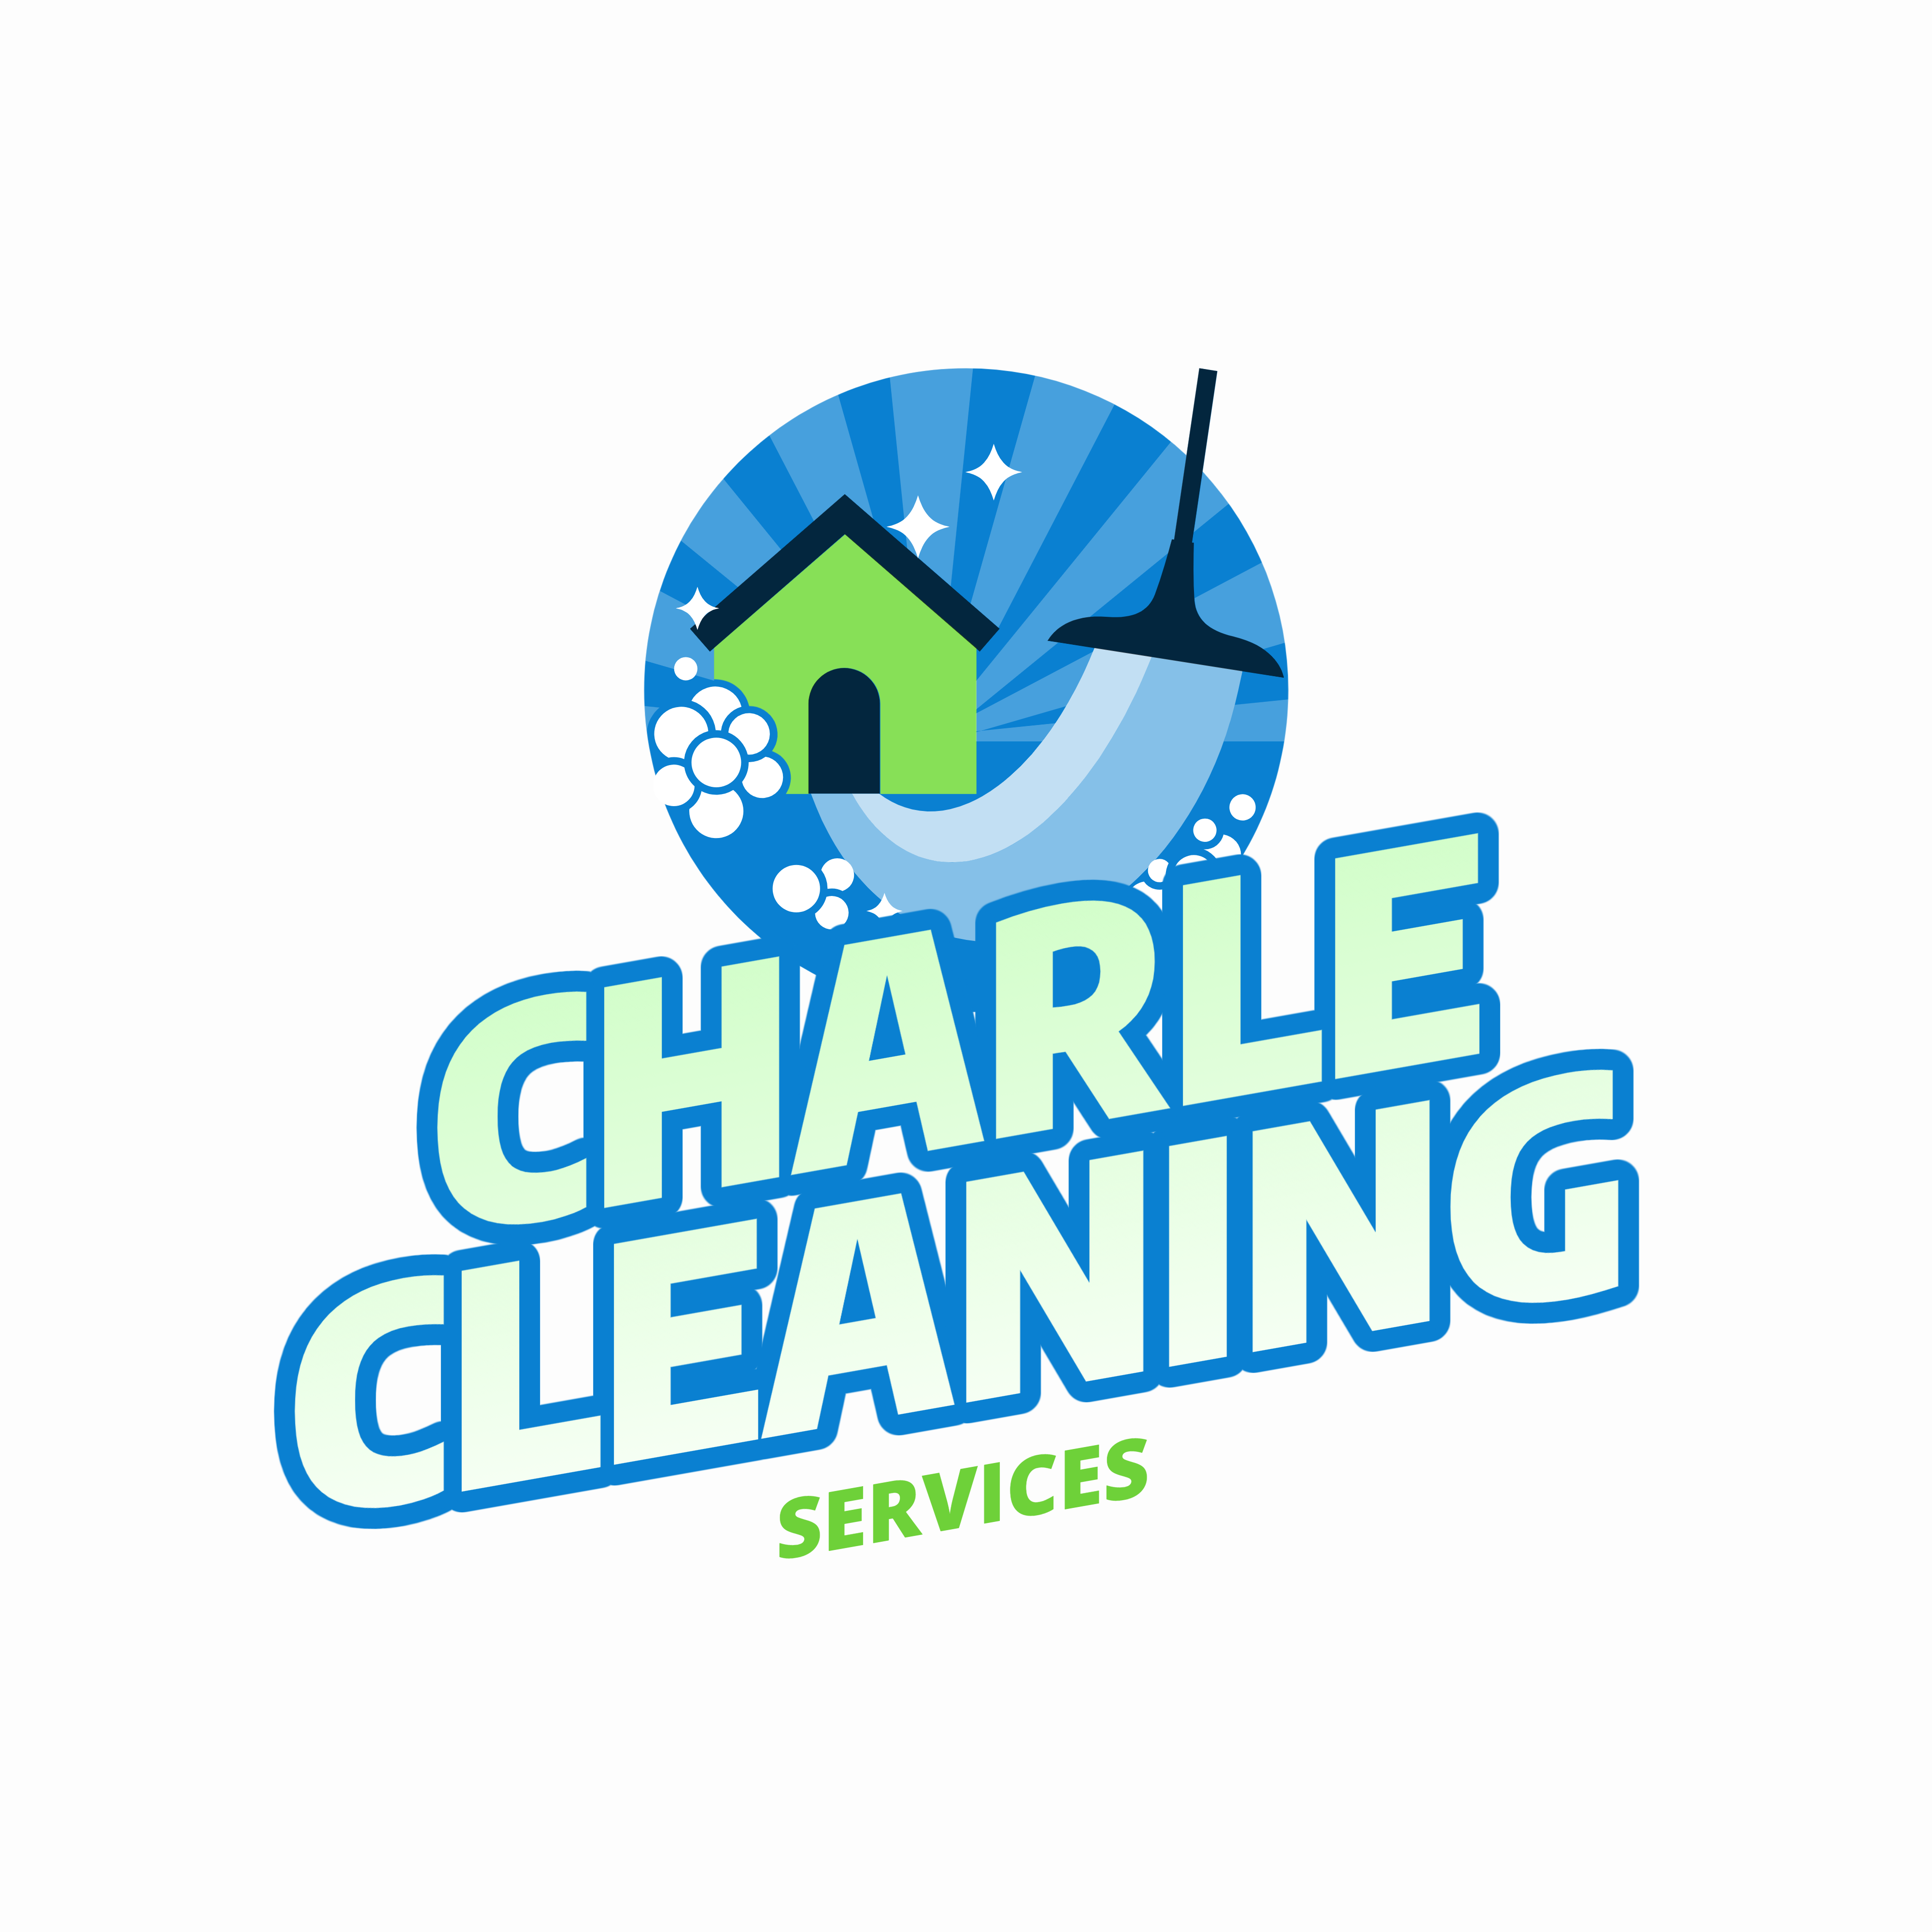 Charle Cleaning Services, Corp. Logo